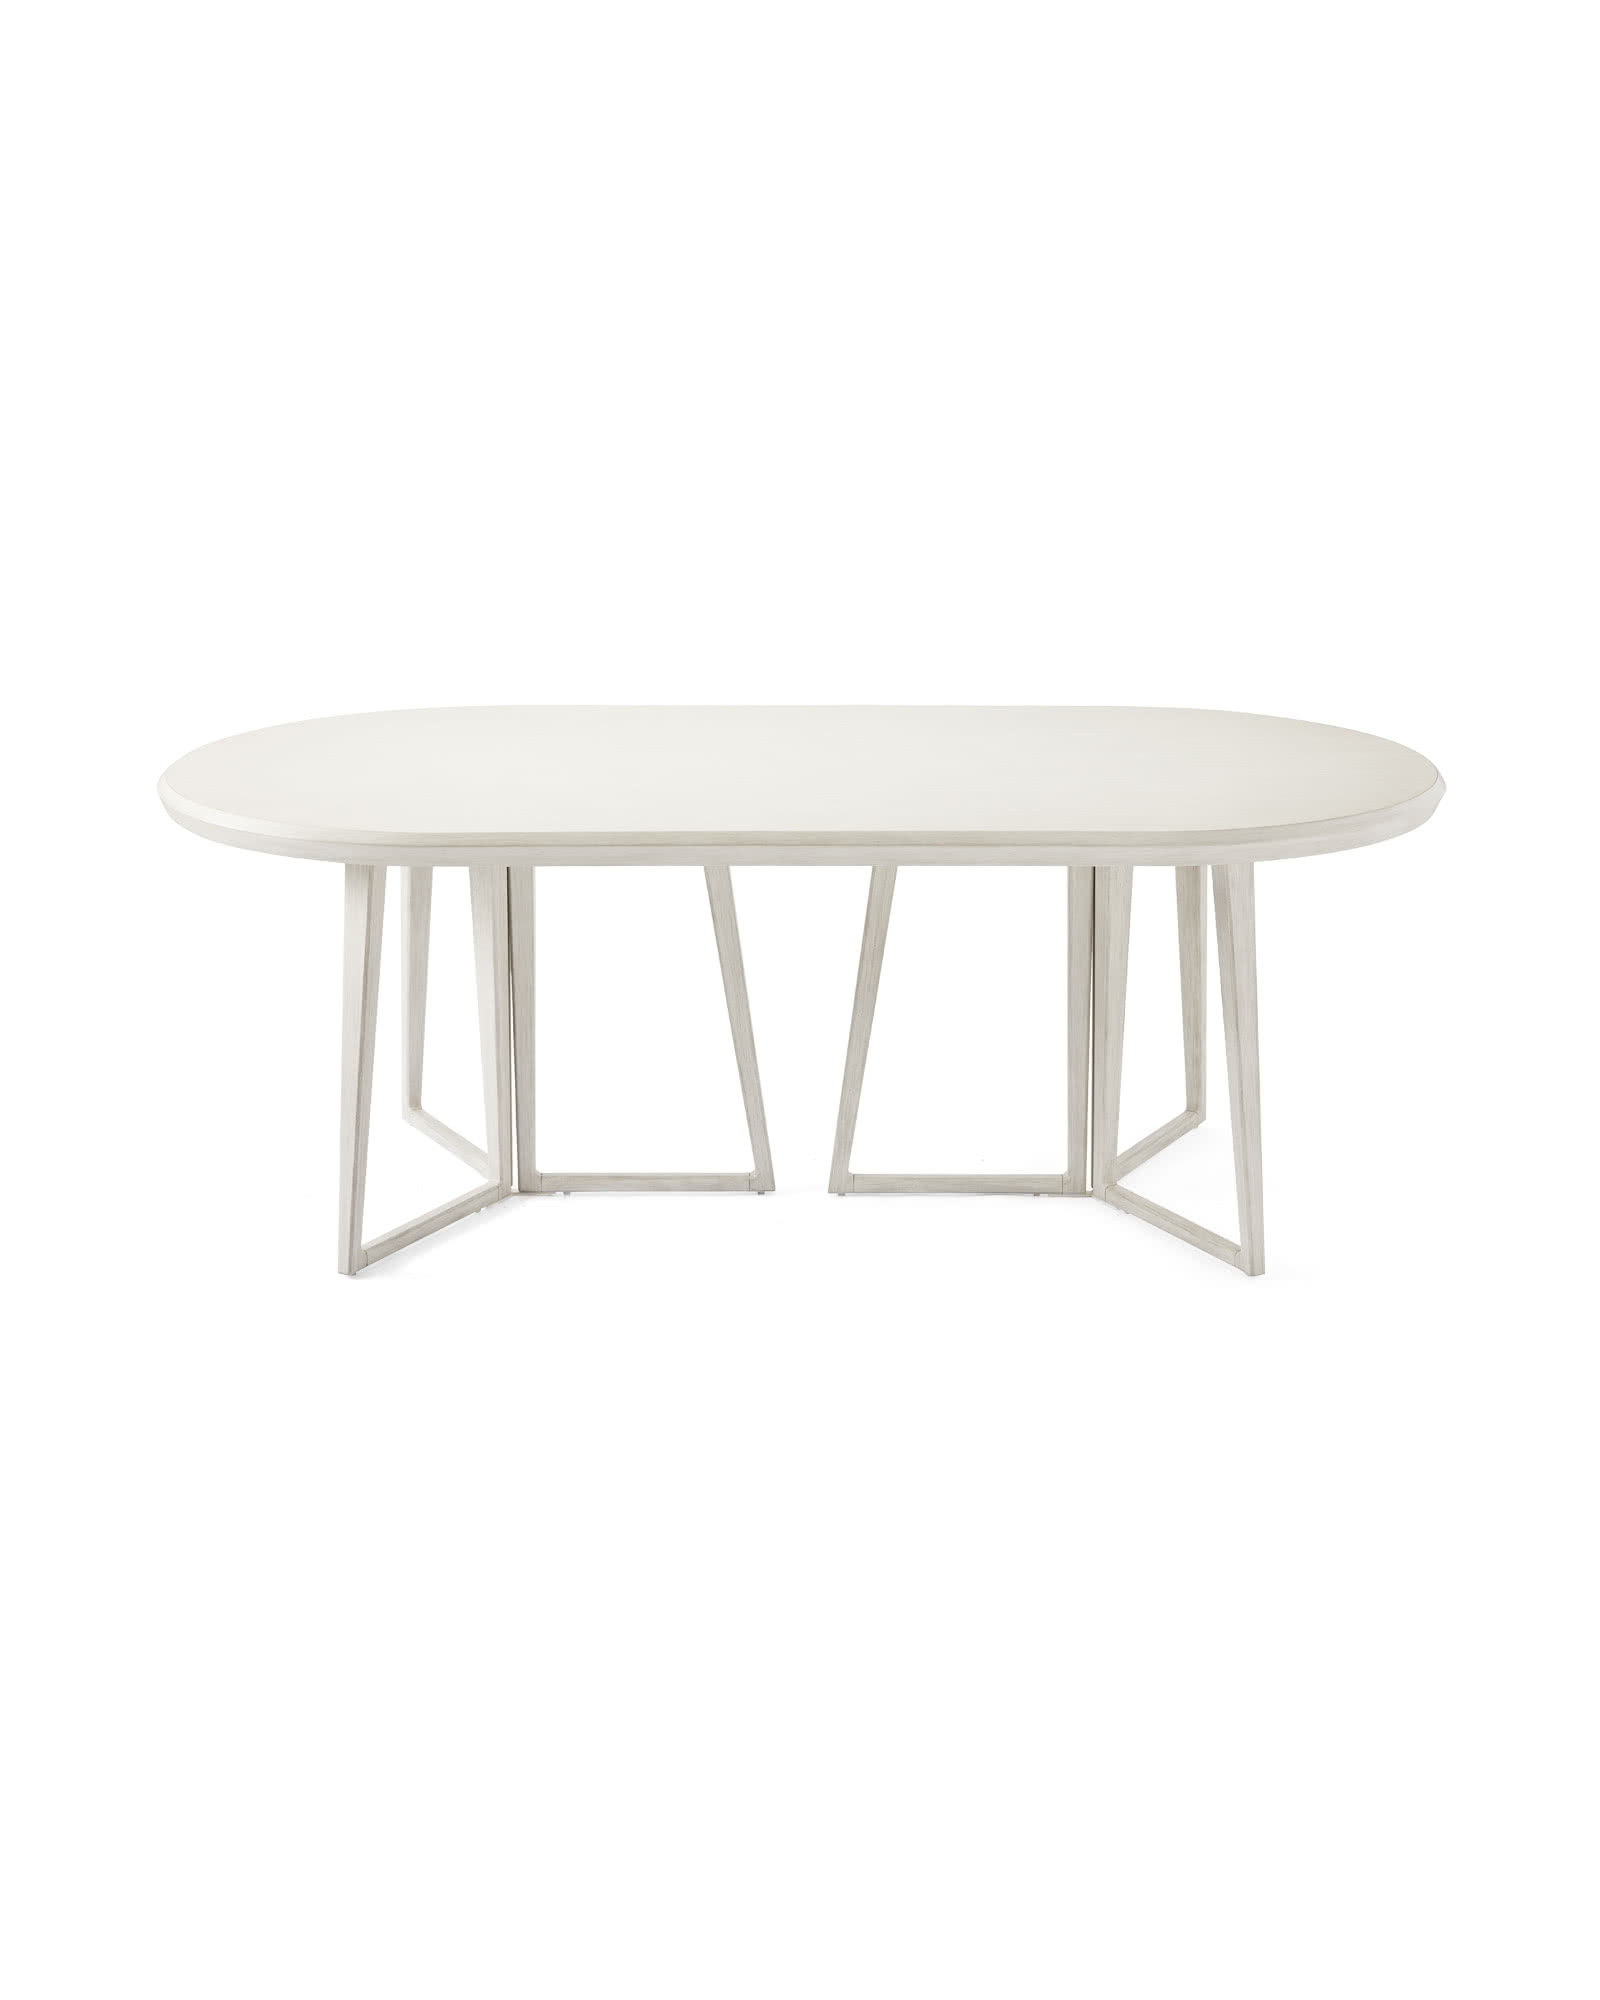 Downing Oval Dining Table -Salt Spray - Image 0